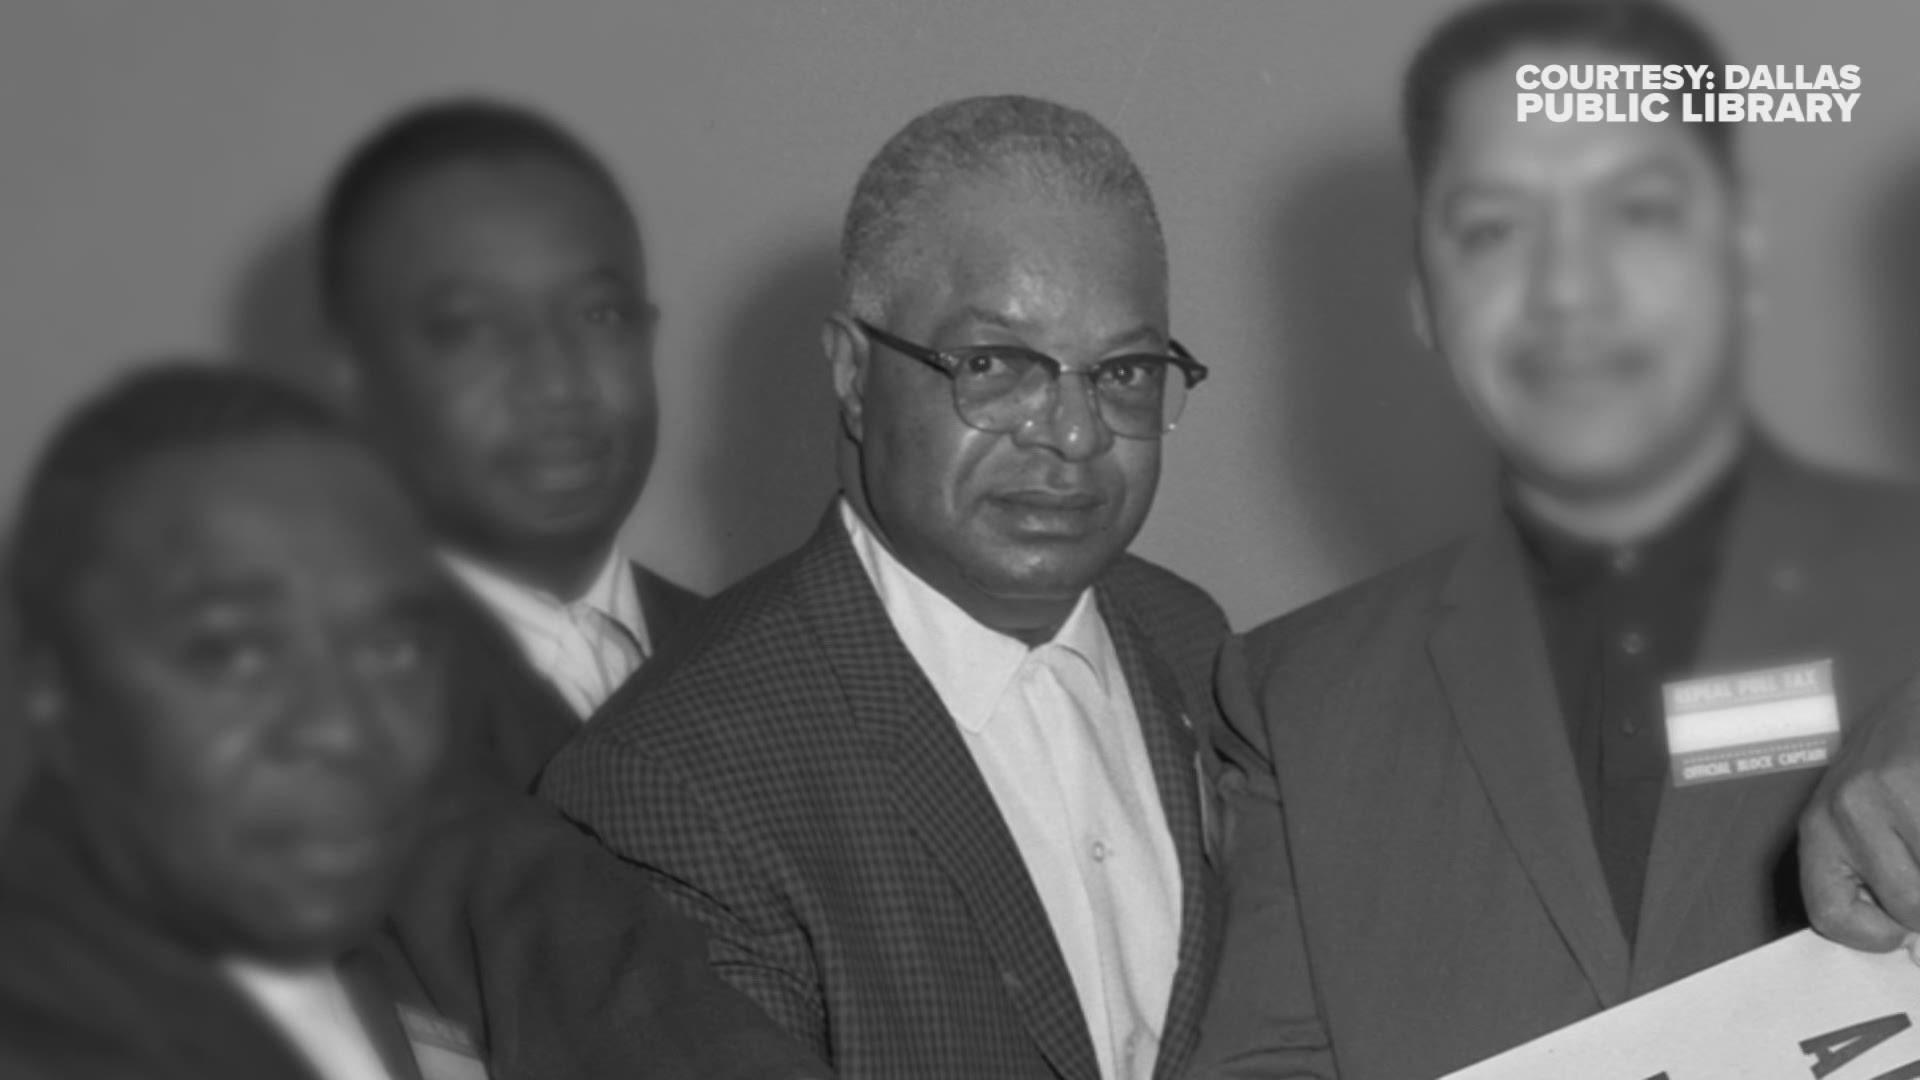 A. Maceo Smith fought against school segregation in the Sweatt v. Painter lawsuit, a case that paved the way for Brown v. Board of Education.